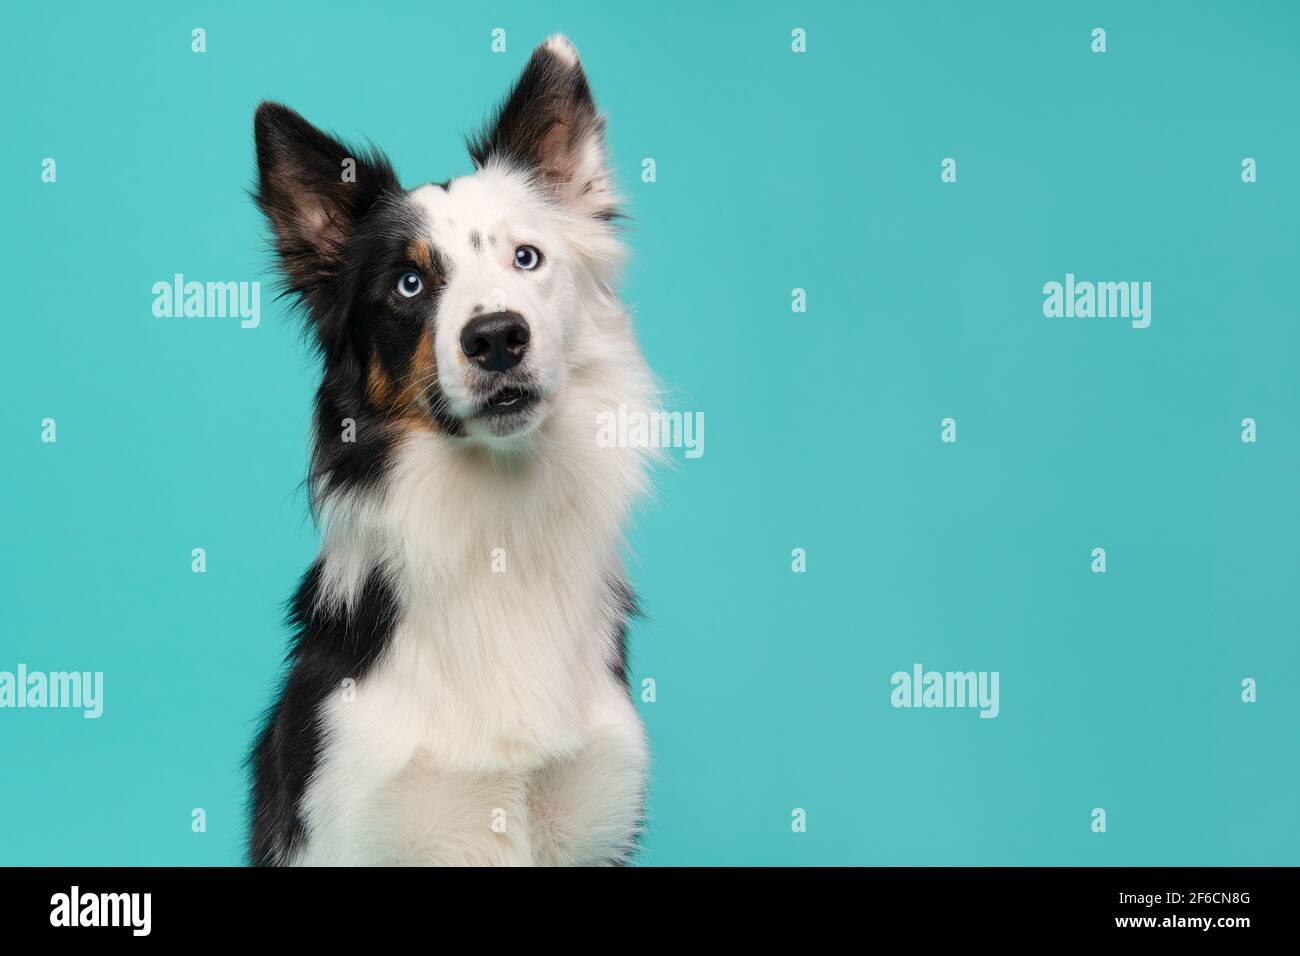 Portrait of a border collie dog on a blue background Stock Photo